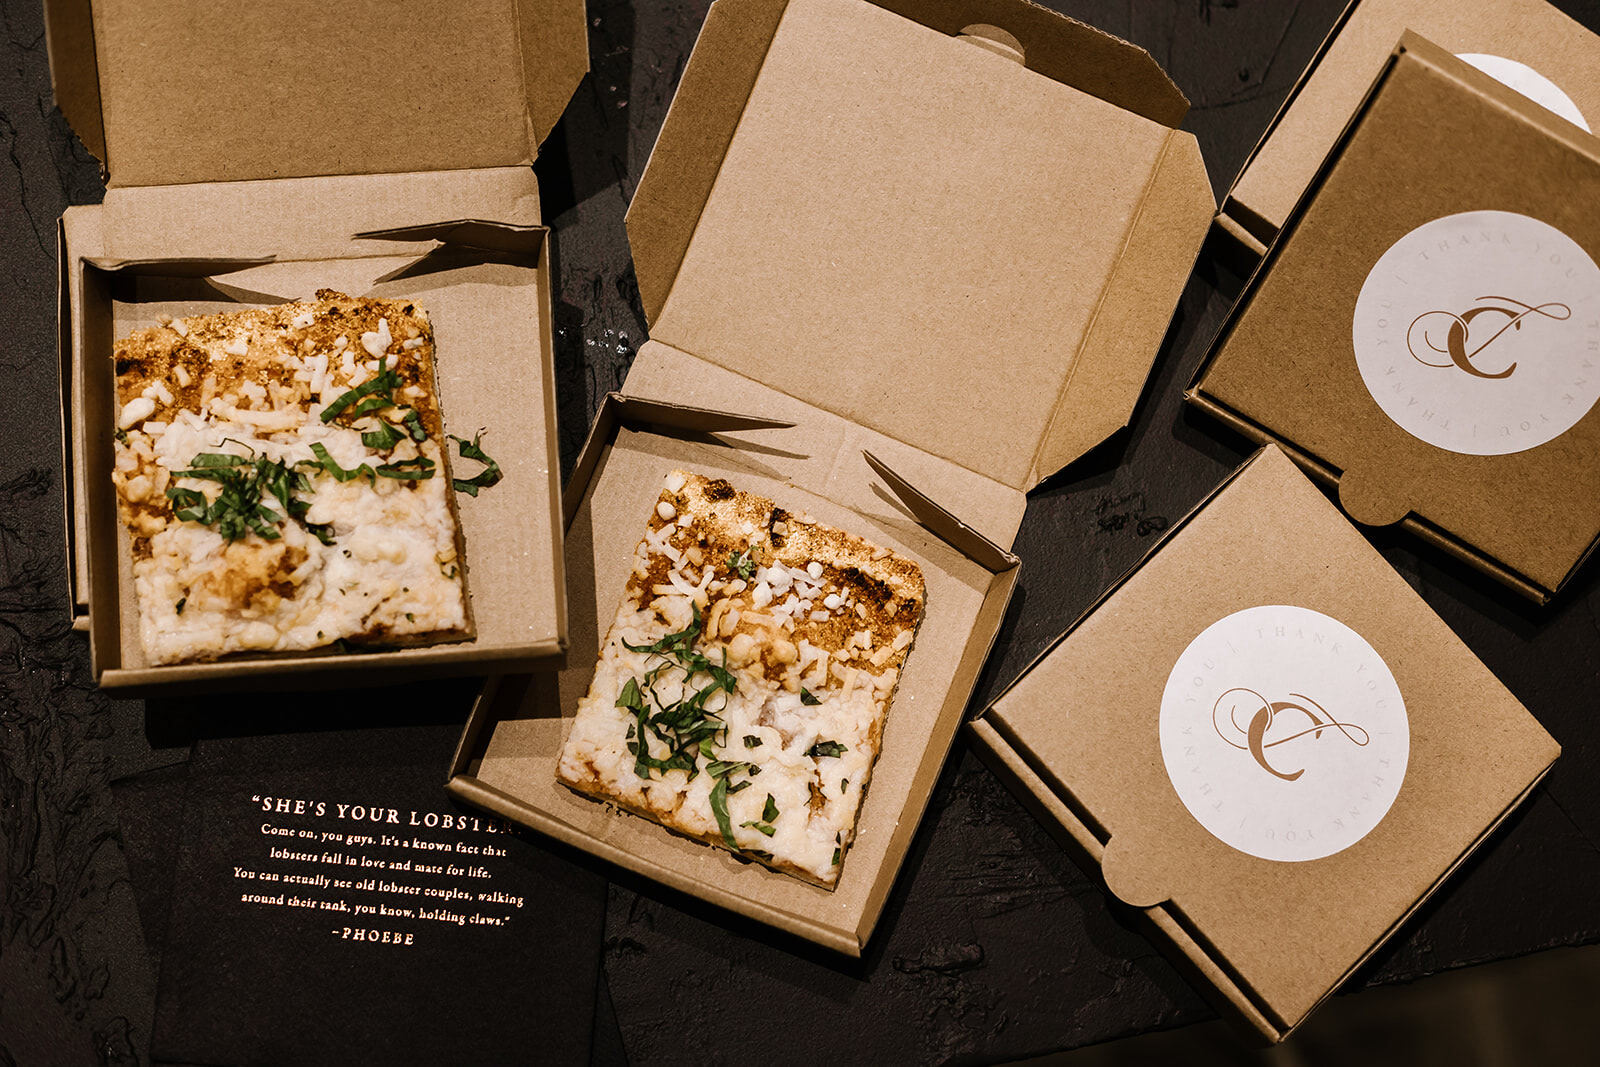 Mini boxes of pizza, with the couple's monogram on a sticker on the lids, made the rounds late-night at an industrial wedding.